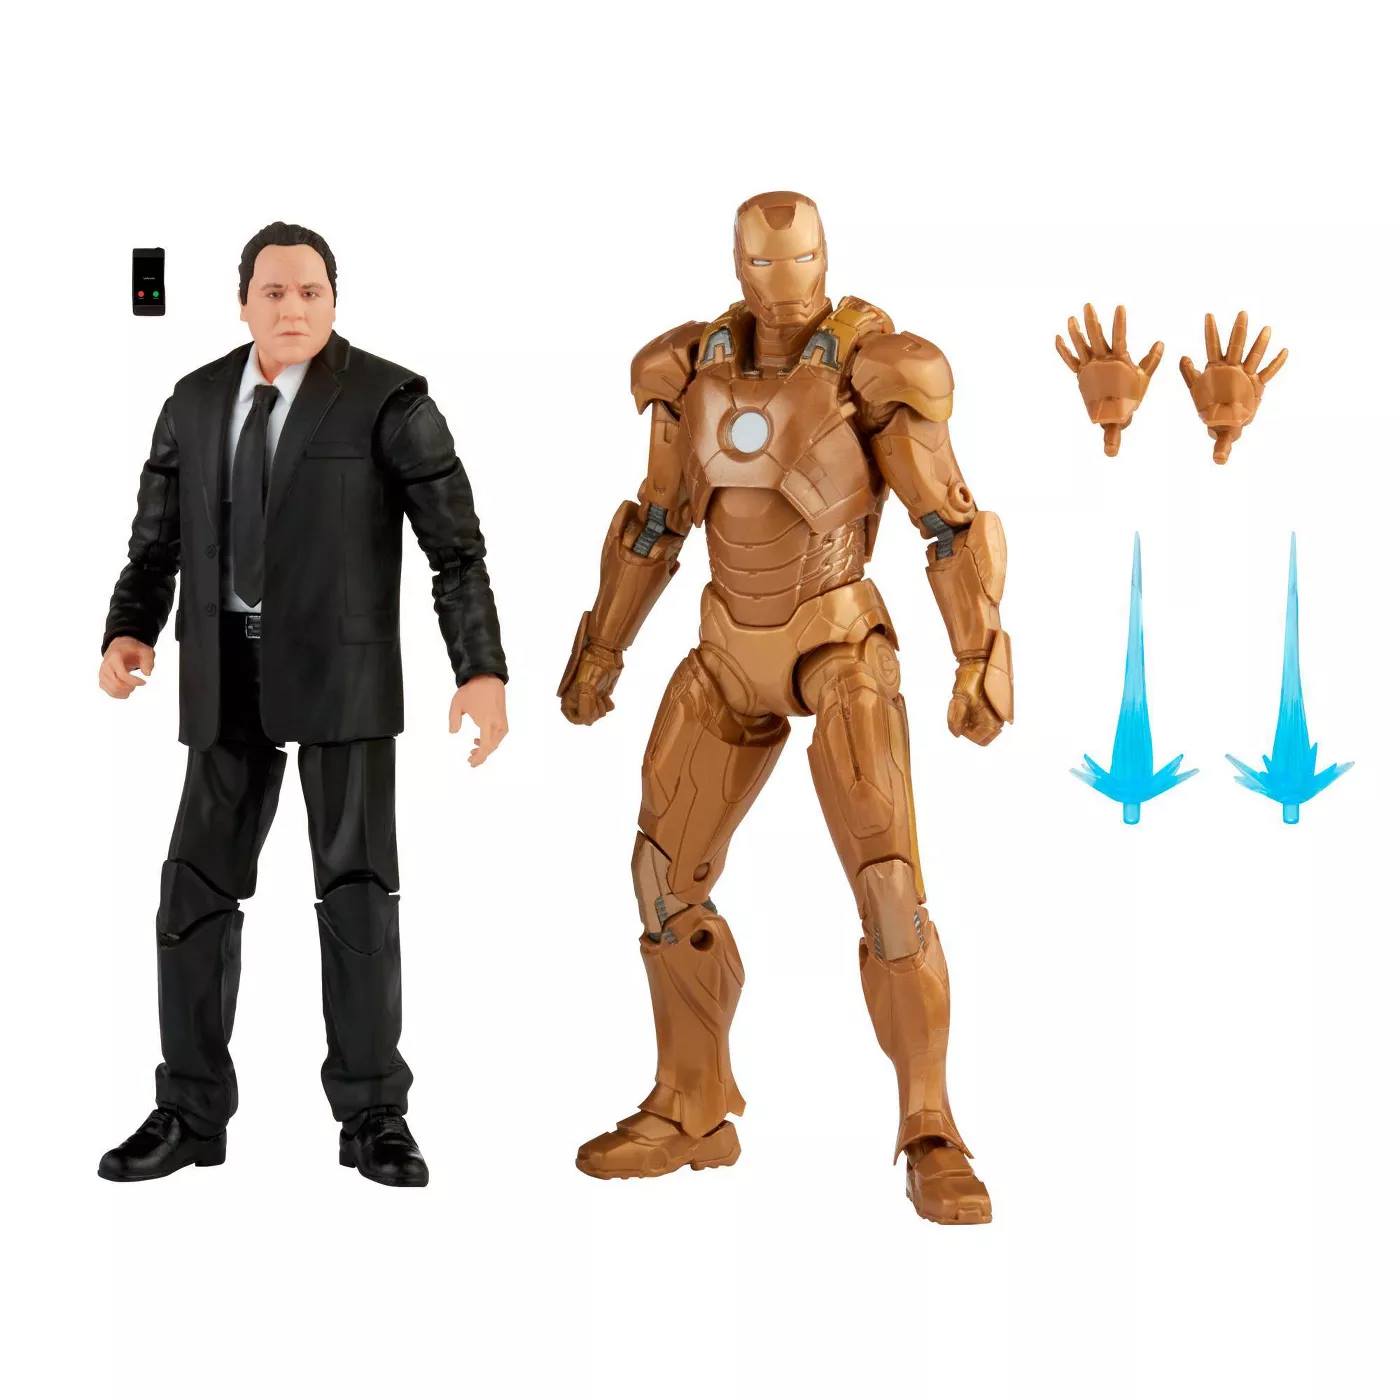 Avengers Marvel Endgame Iron Man & Marvel's Rescue Figure 2 Pack Toy  Characters from Marvel Cinematic Universe Mcu Movies